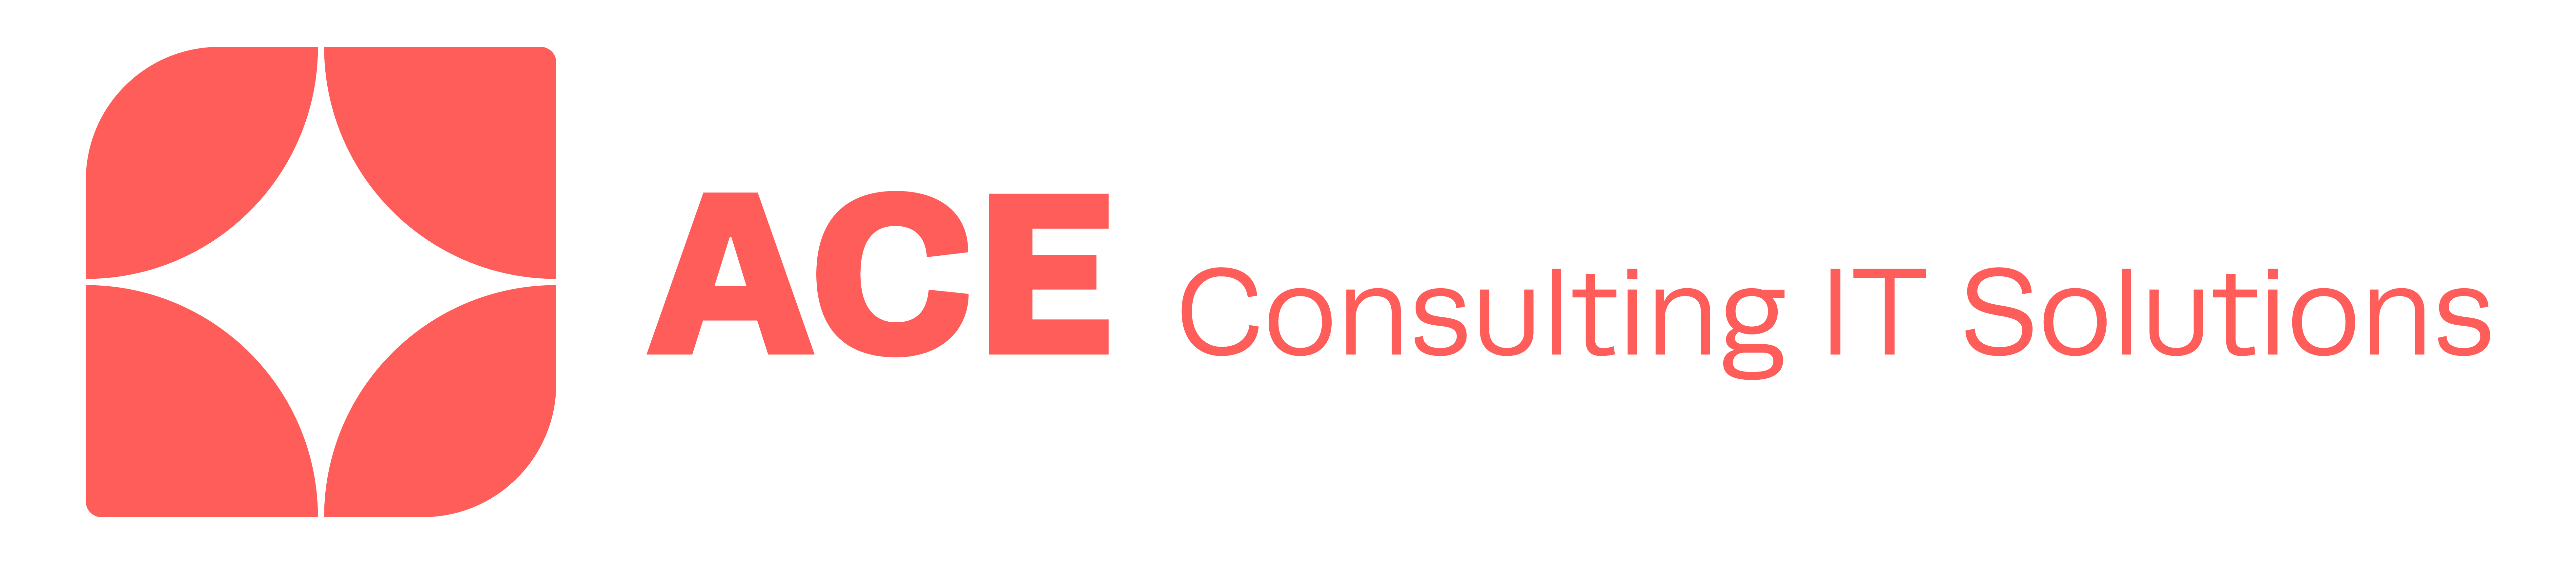 ACE Consulting IT Solutions